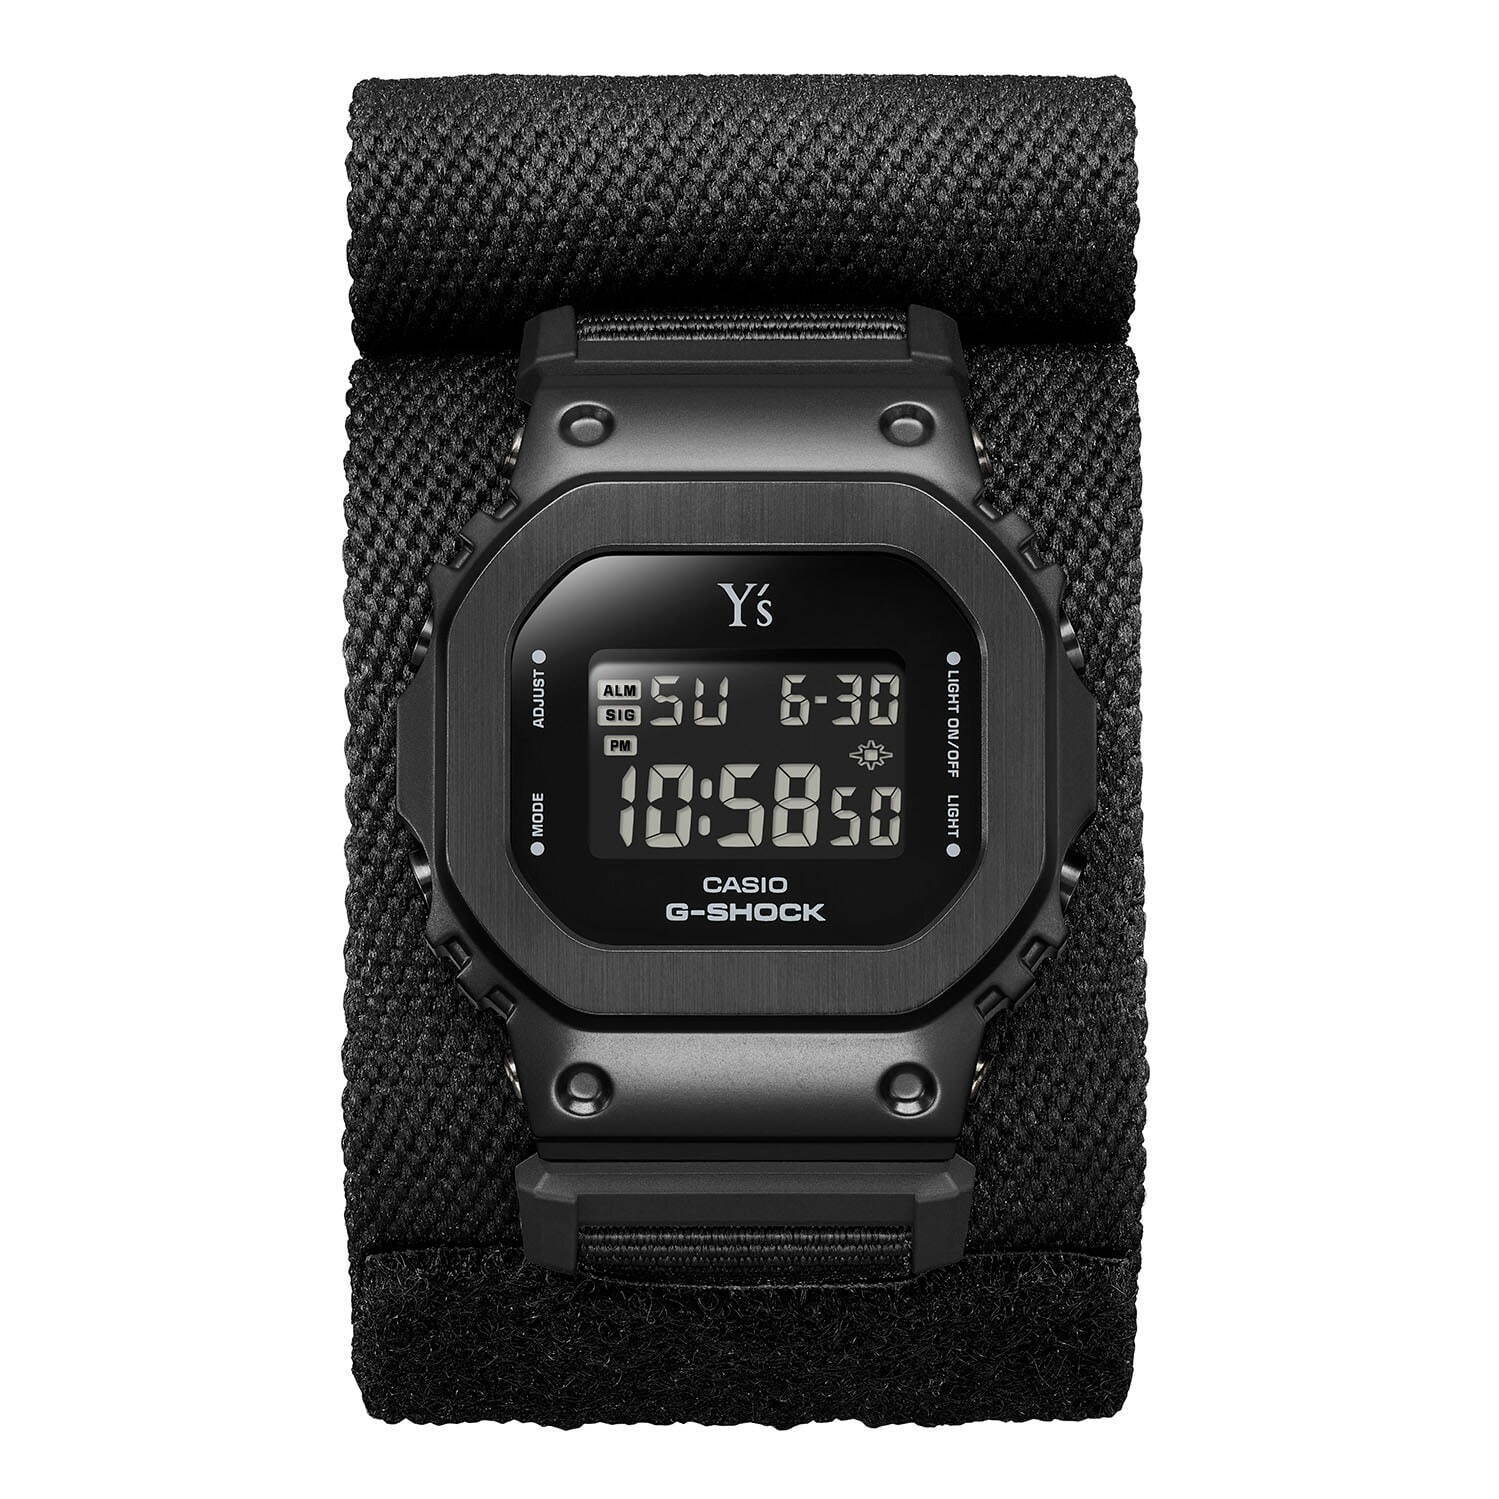 x G-Shock GM-S5600YS-1 includes a covered watch band